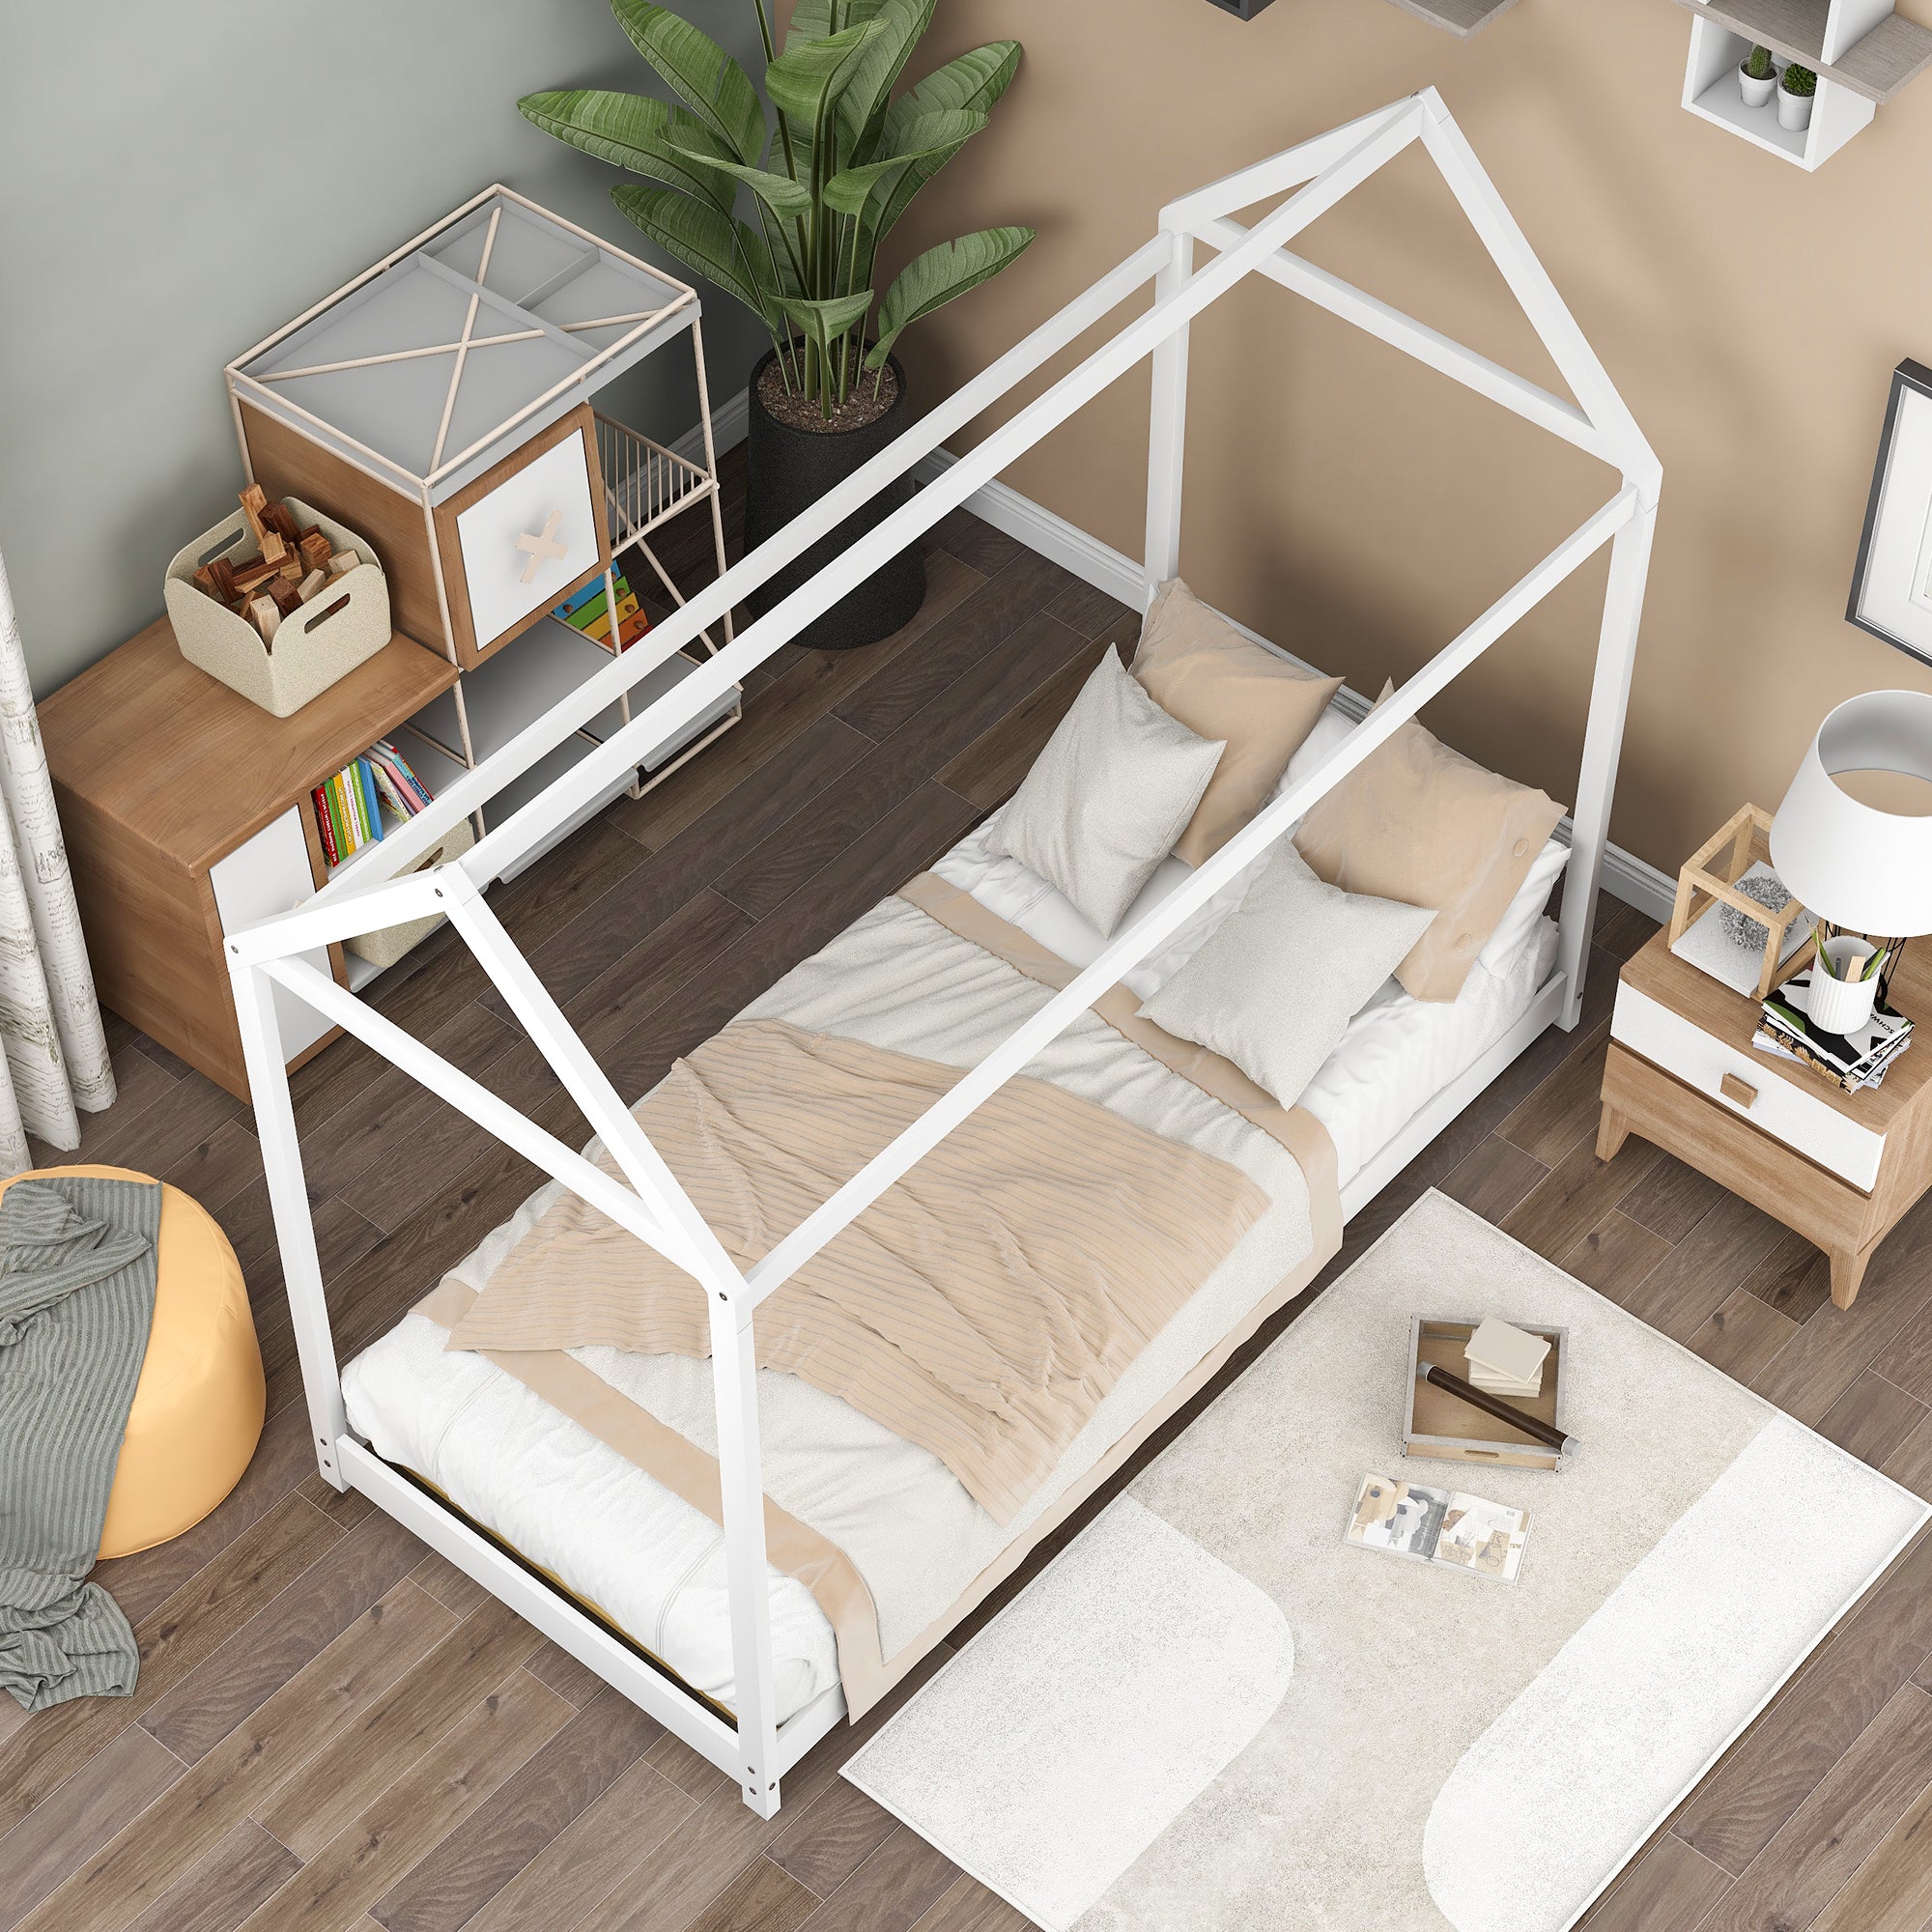 Twin Size Wooden House Bed - White